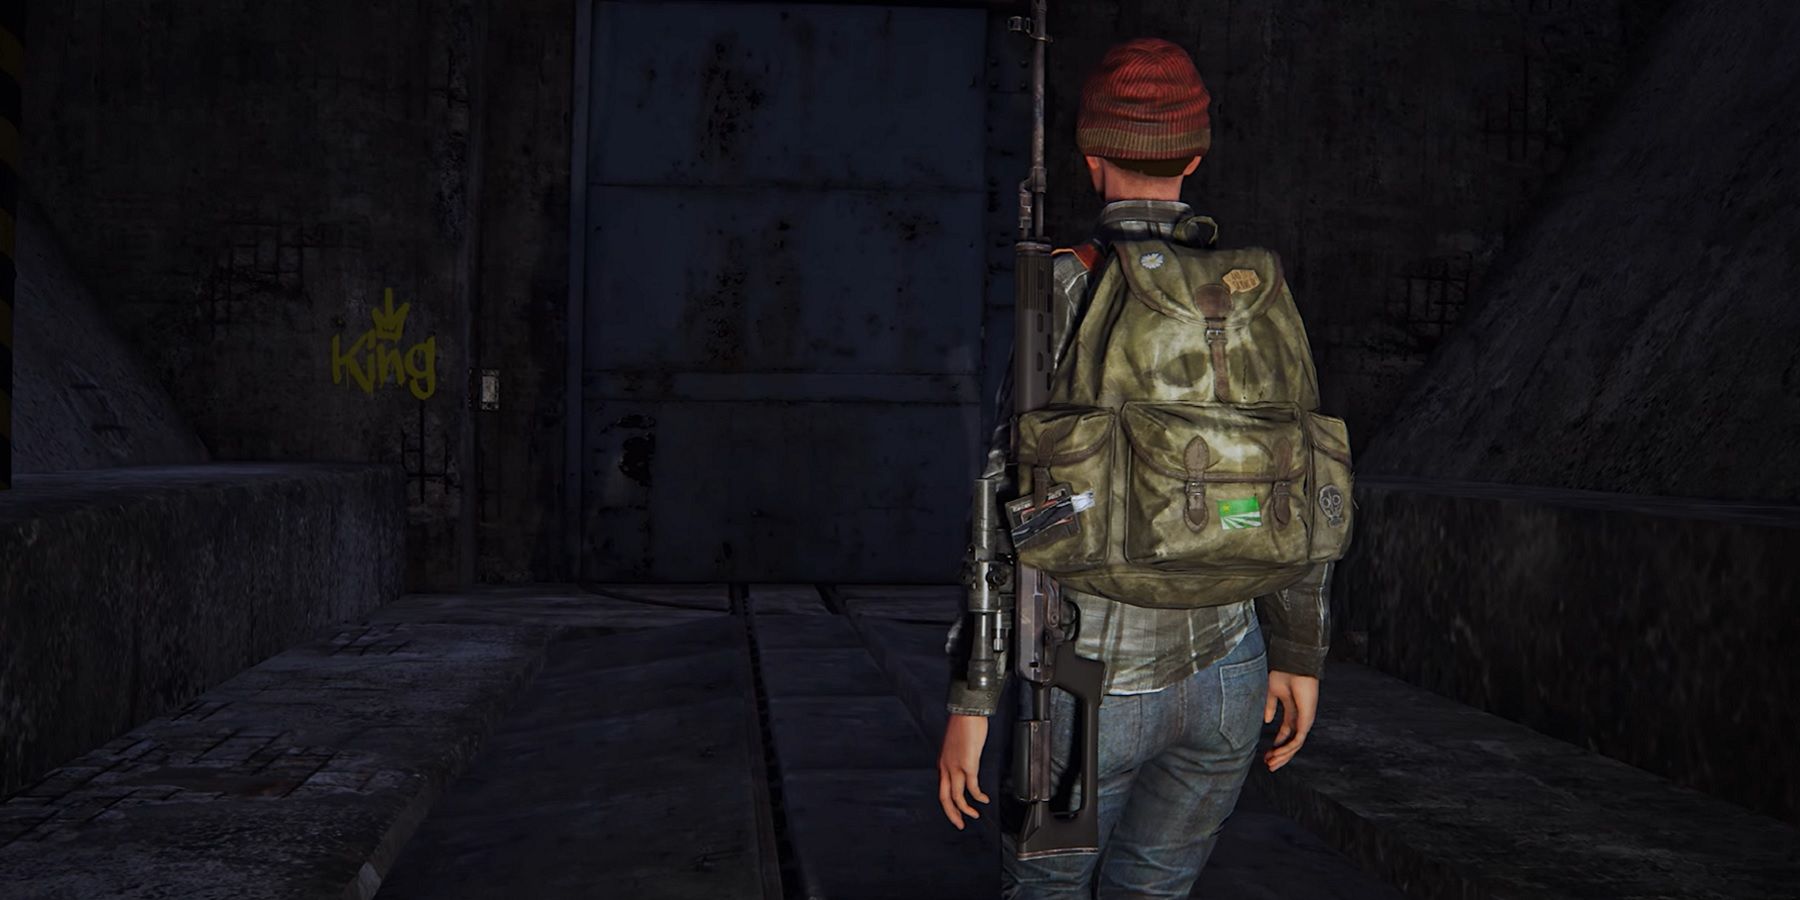 Significant DayZ Update Rolls Out, Adds Underground Bunker and More